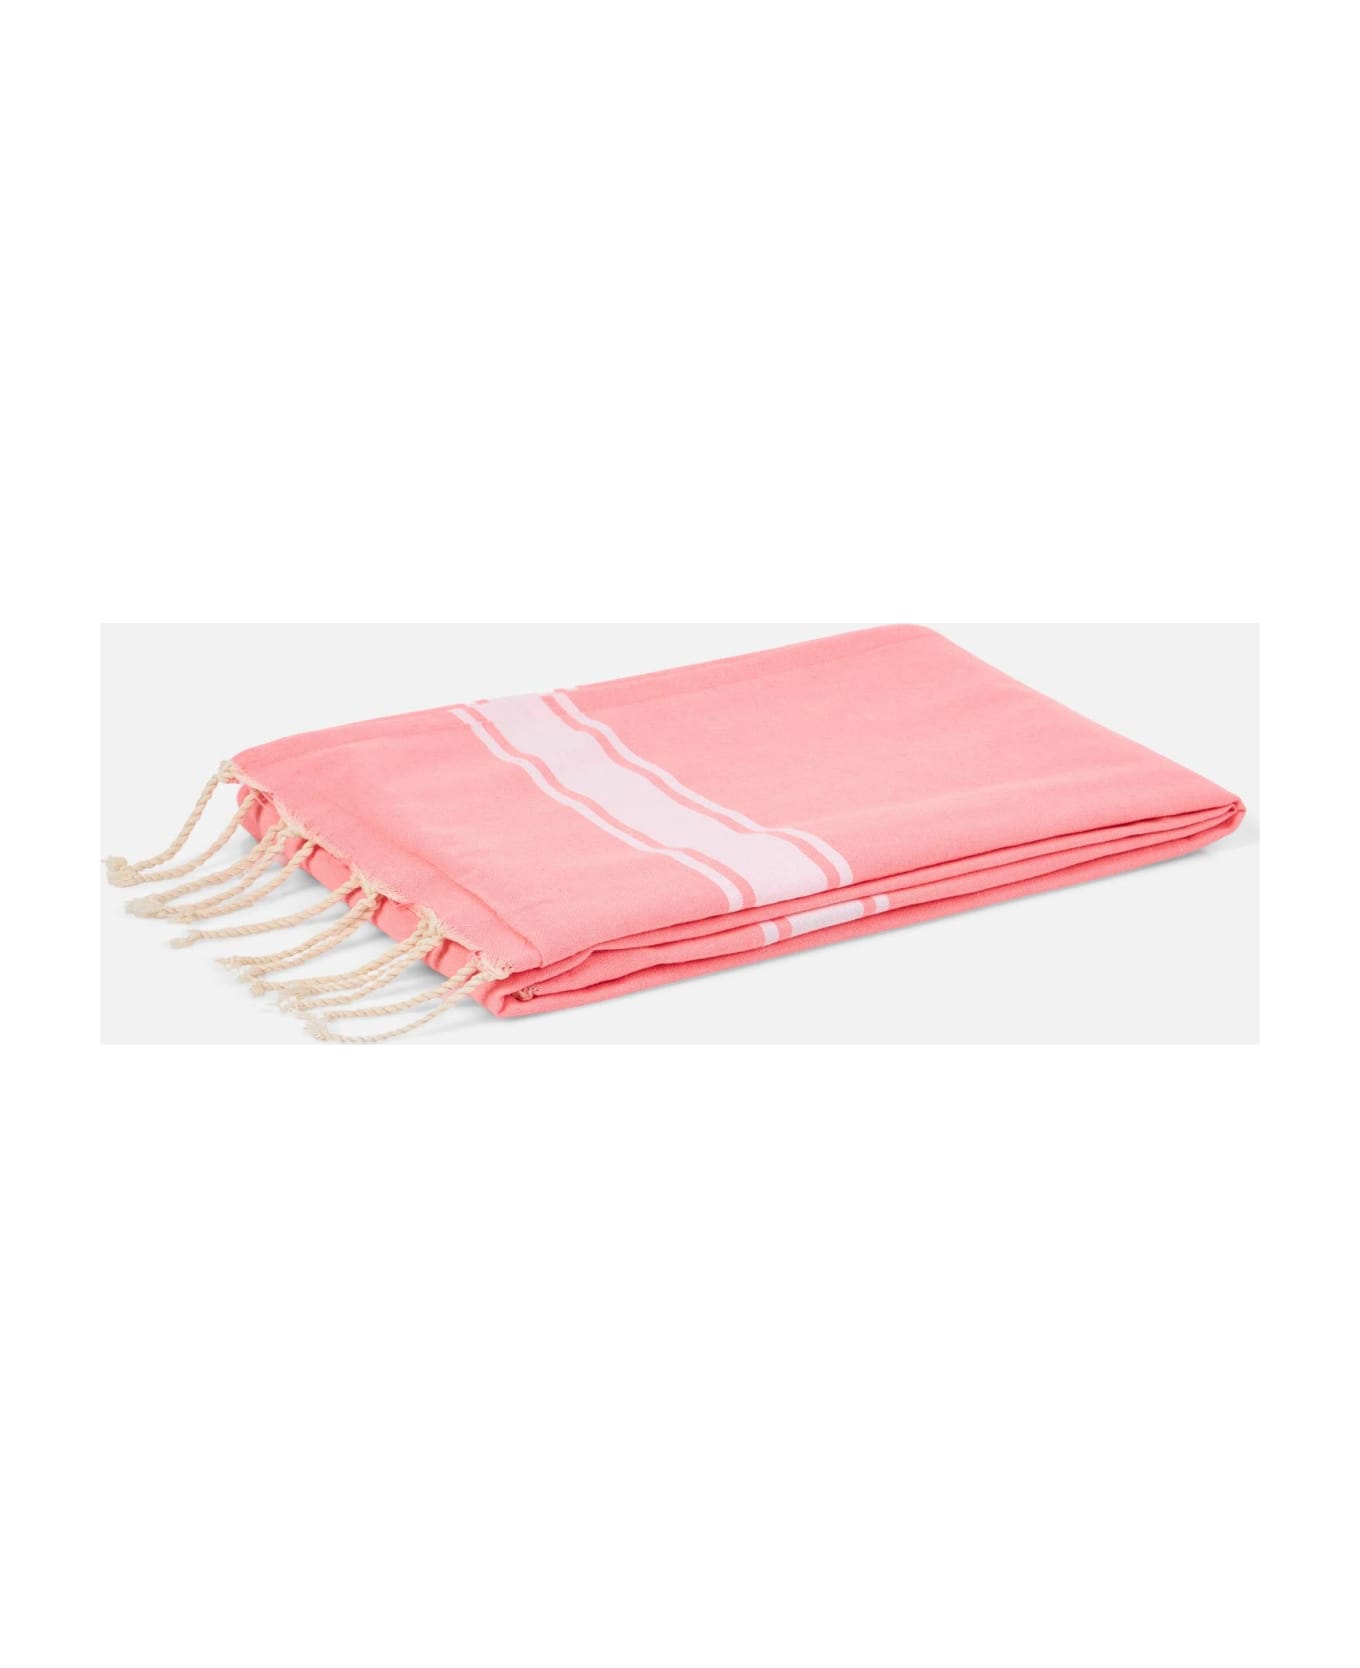 MC2 Saint Barth Fluo Pink Fouta Doubled With Sponge - PINK